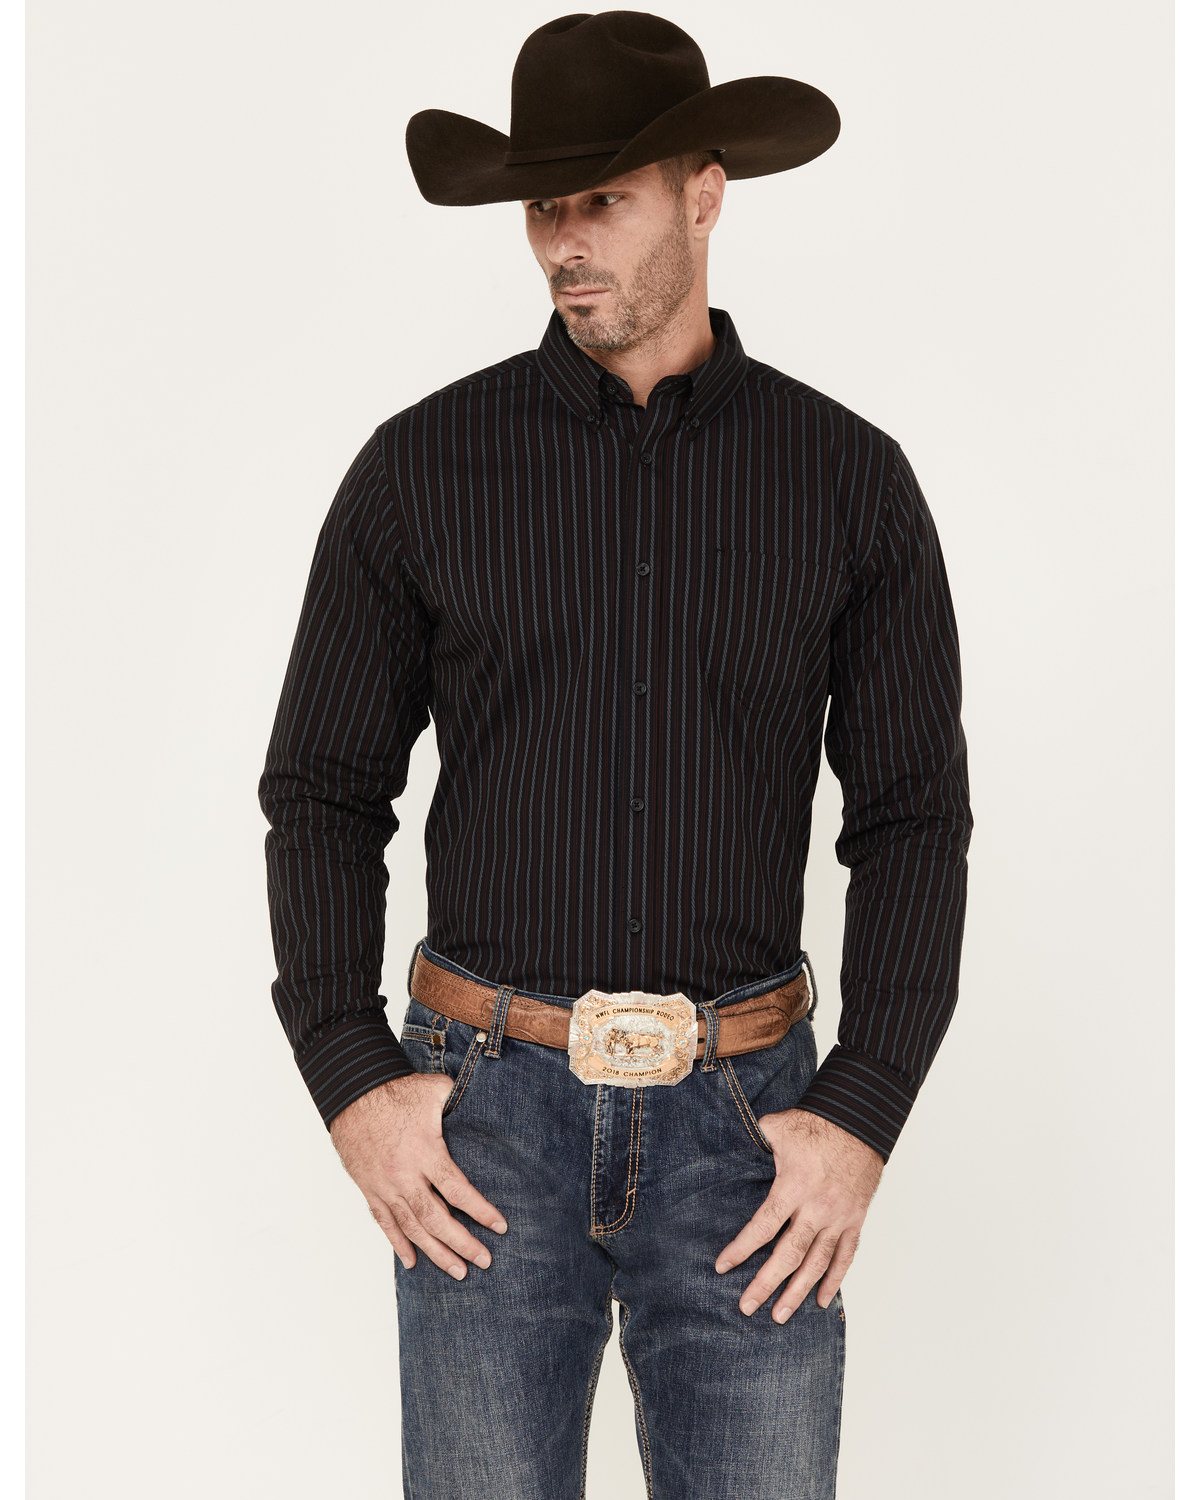 Cody James Men's Racer Striped Long Sleeve Button-Down Stretch Western Shirt